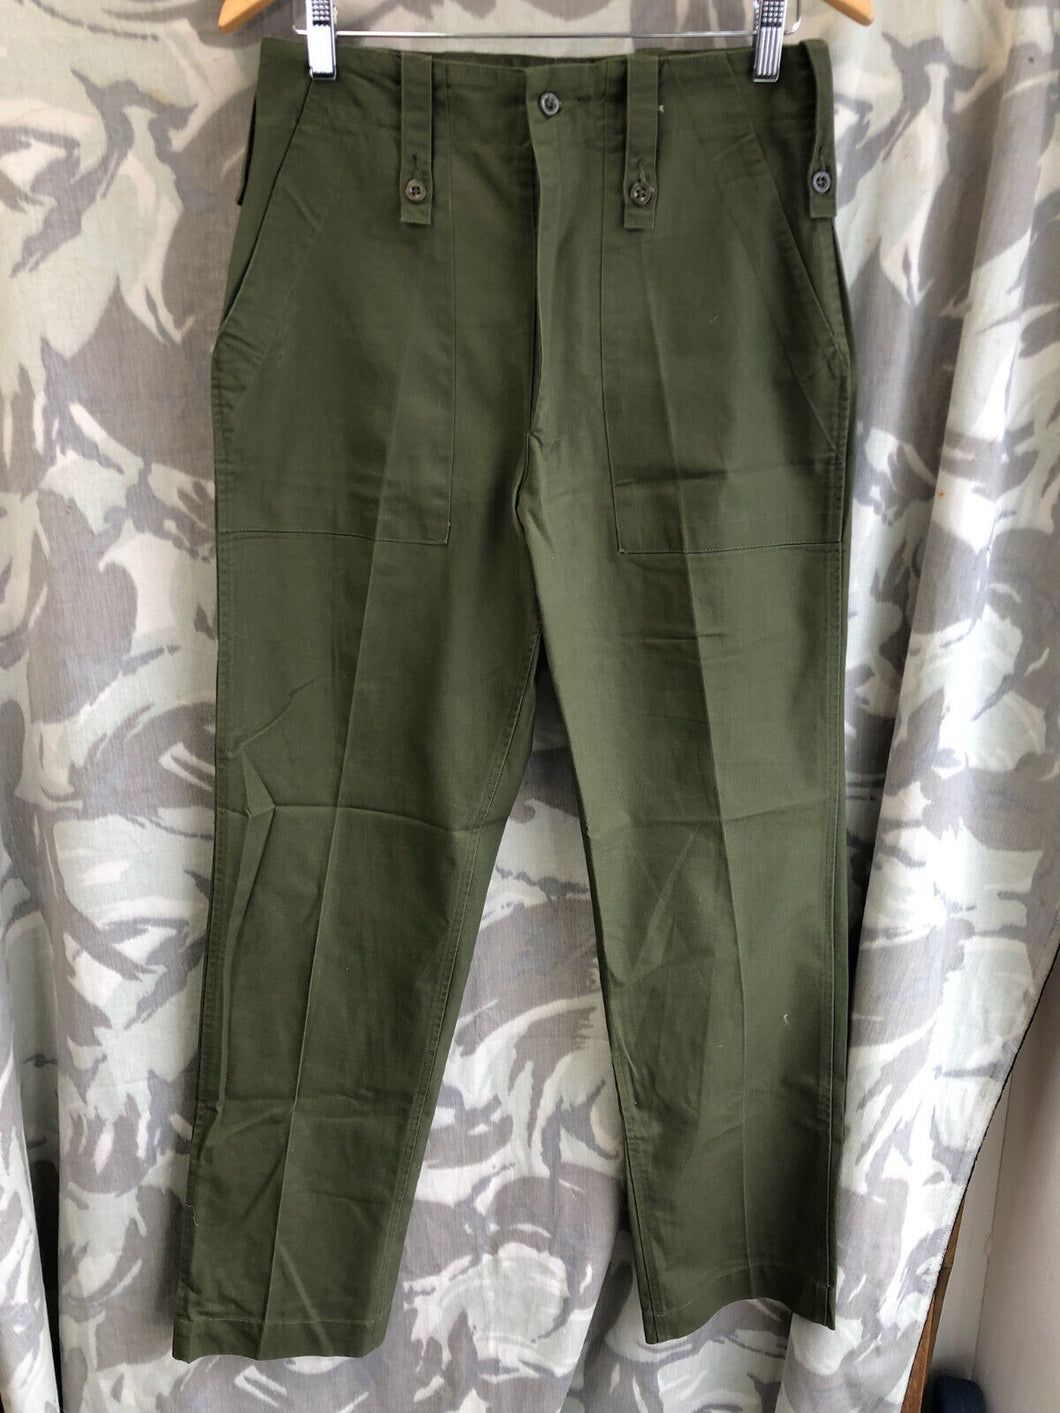 Genuine British Army Olive Green Lightweight Fatigue Combat Trousers - 85/88/104